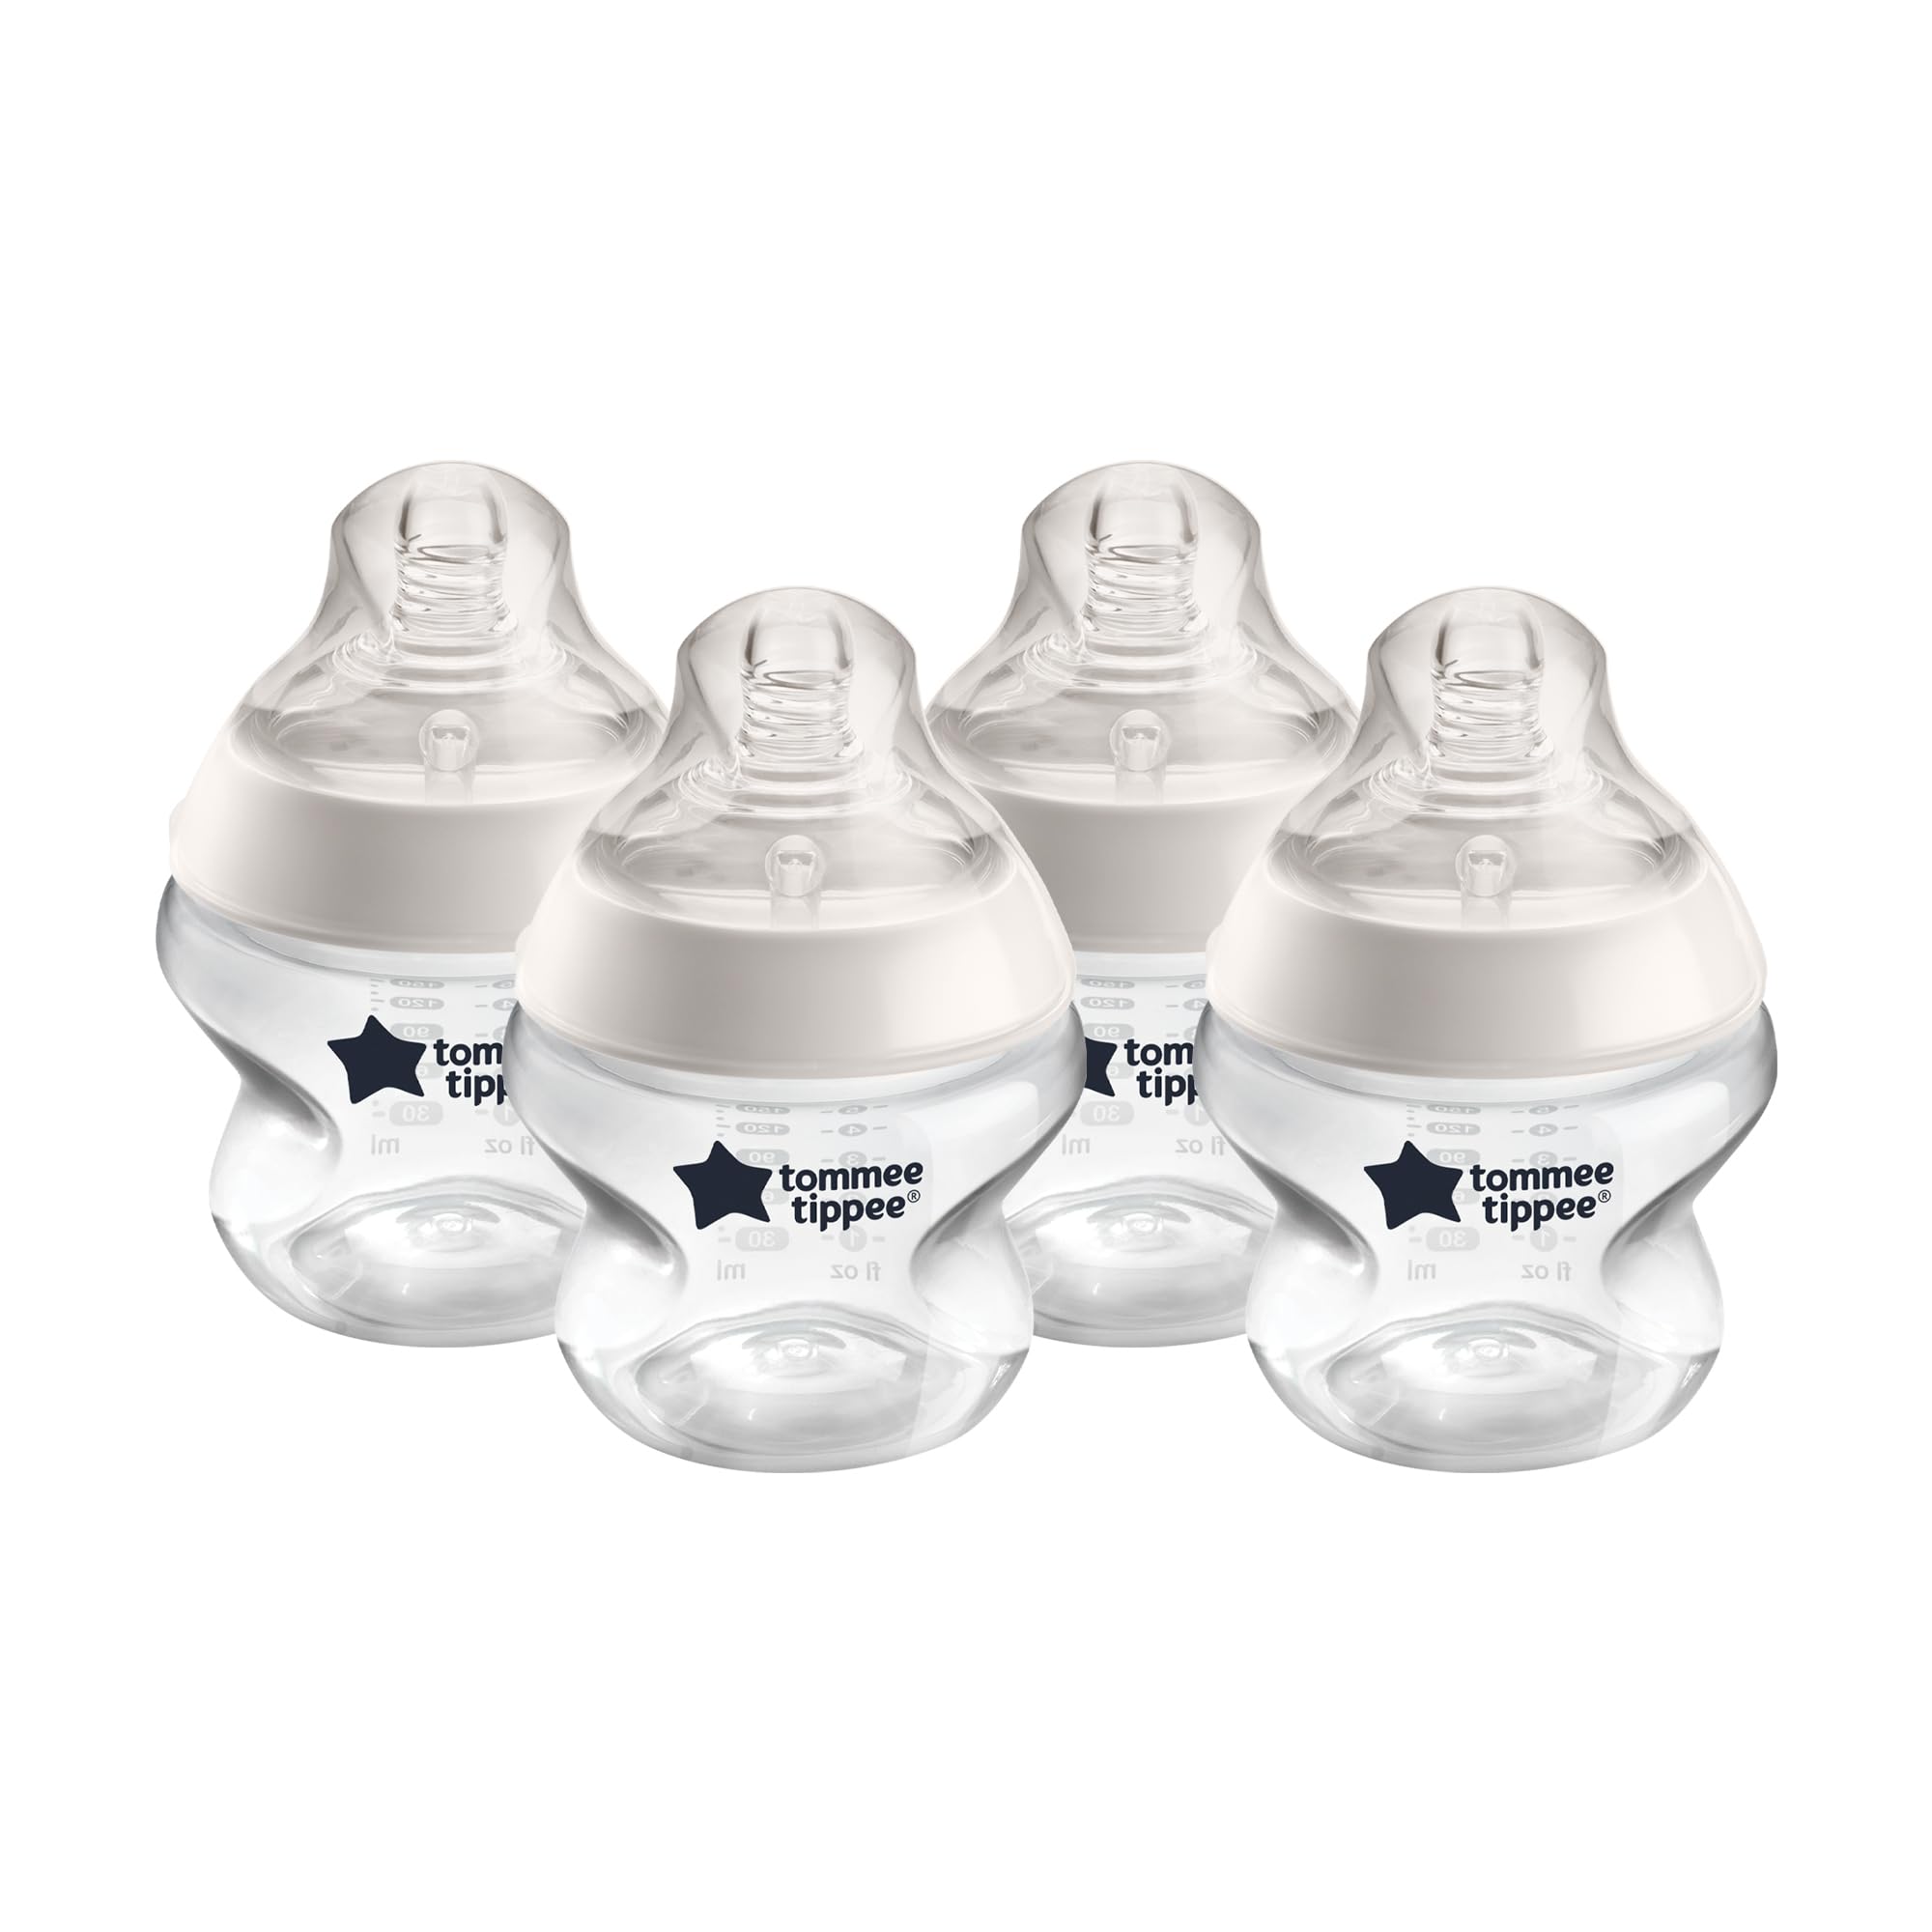 Tommee Tippee Closer to Nature Anti-Colic Baby Bottle, 5oz, Slow-Flow Breast-Like Nipple for a Natural Latch, Anti-Colic Valve, Pack of 4